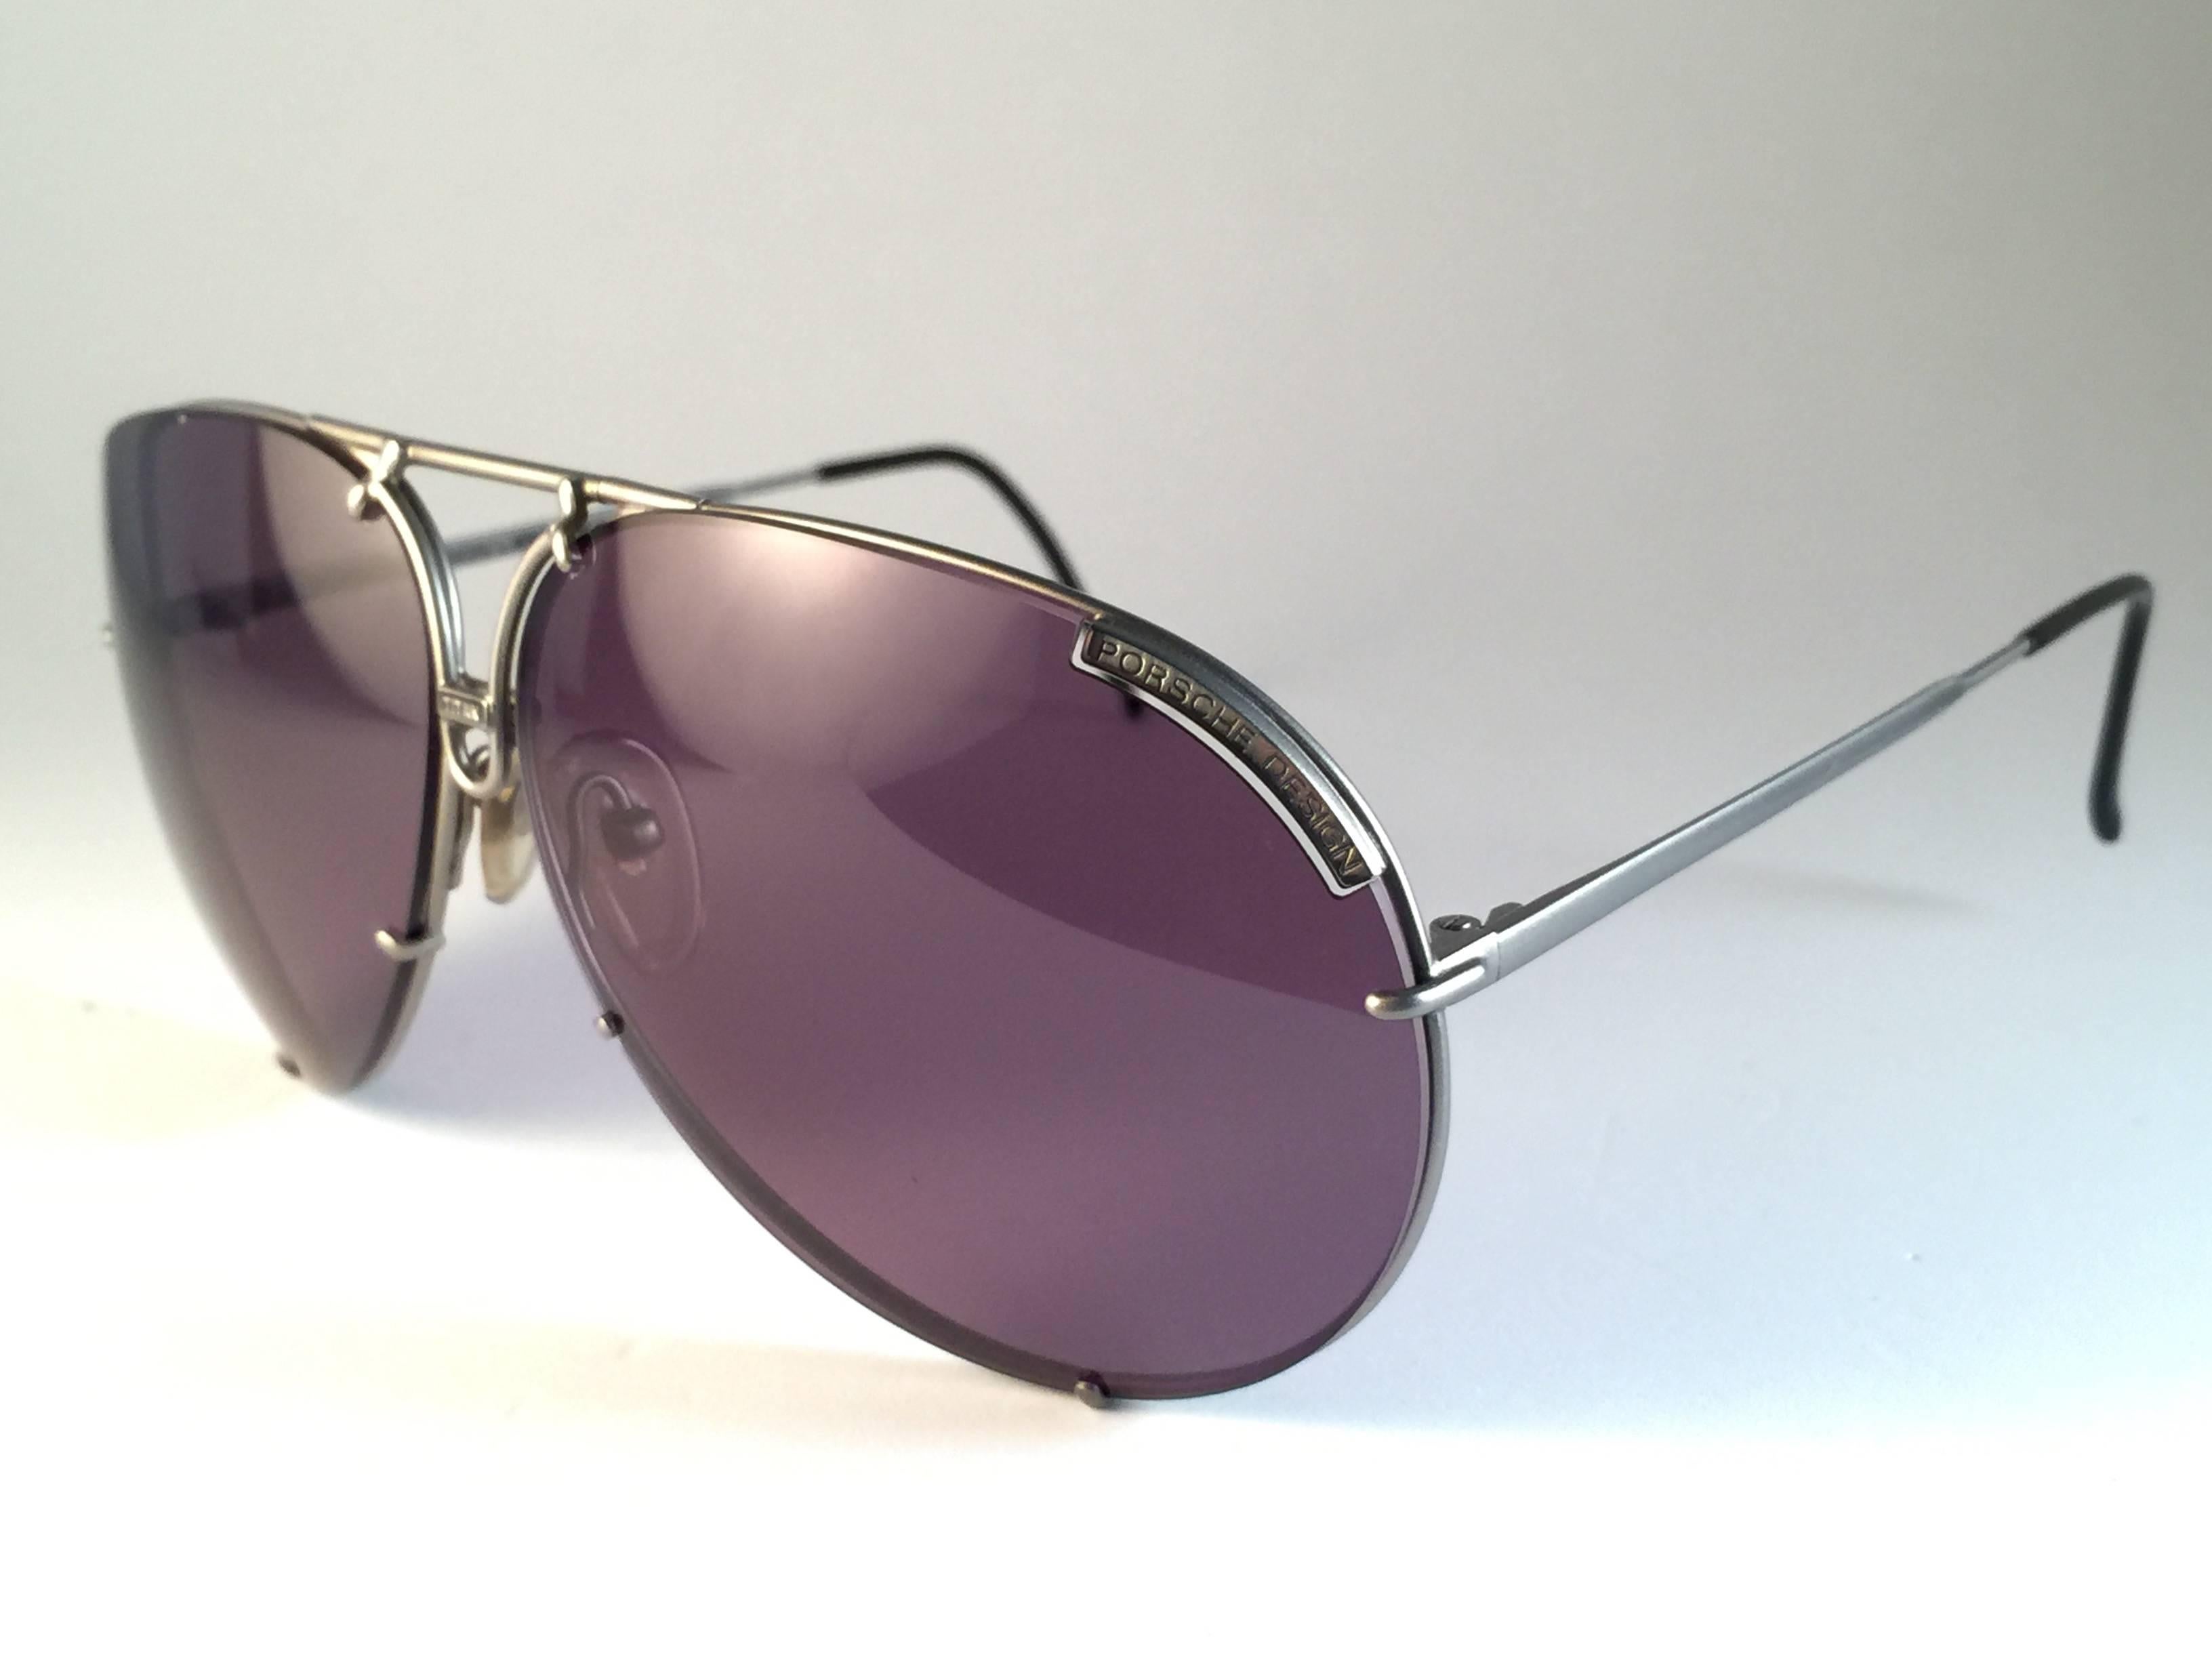 New 1980's Porsche Design 5621 Silver Matte Titan frame with grey lenses.  Amazing craftsmanship and quality.  
Comes with the original black Porsche hard case thats has some wear on it due to nearly 40 years of storage. Extra set of lenses for this